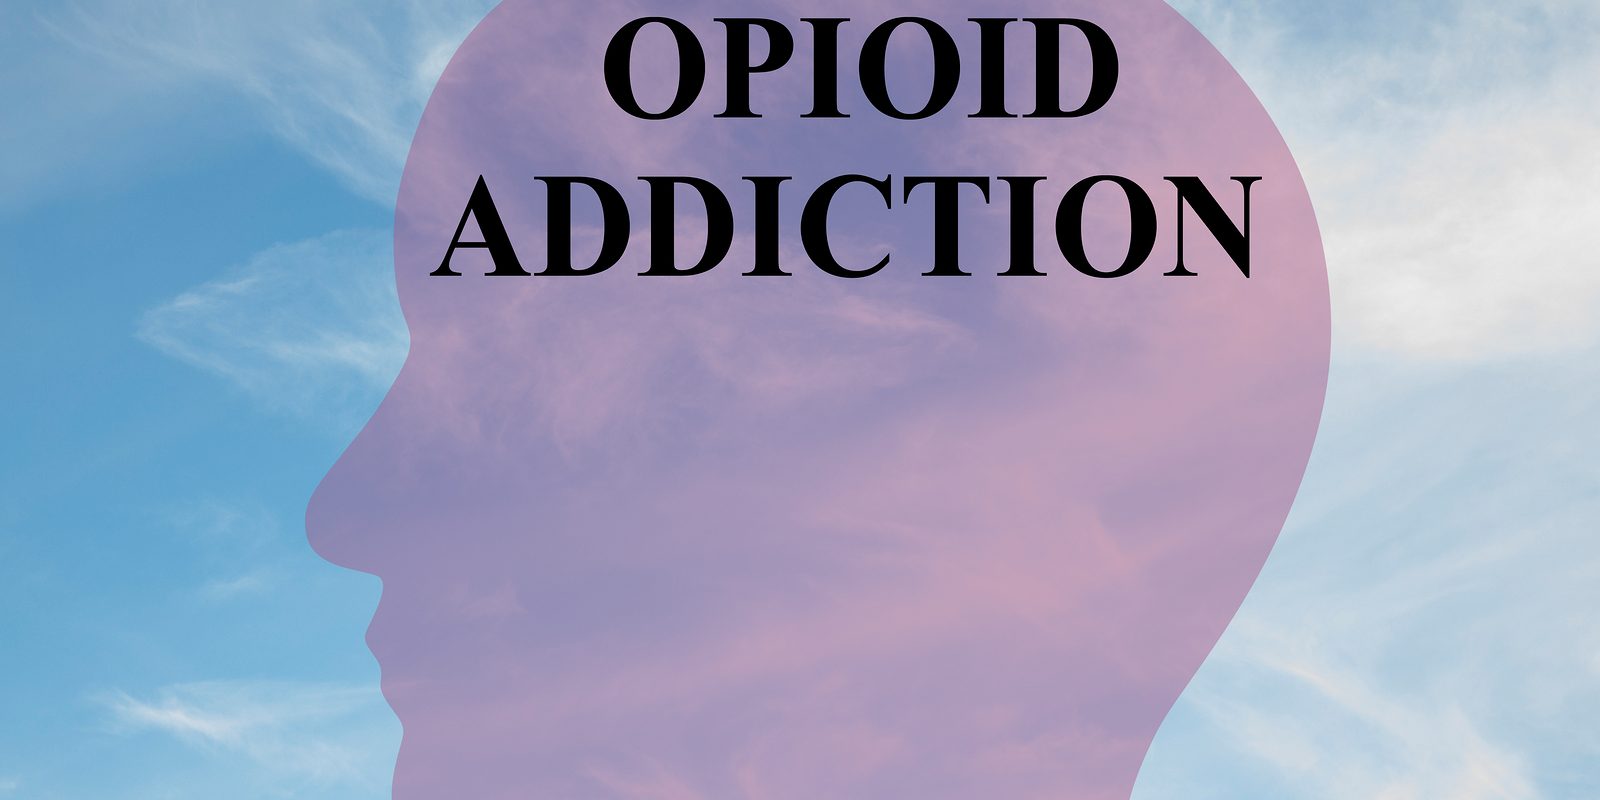 Render illustration of "OPIOID ADDICTION" script on head silhouette with cloudy sky as a background.